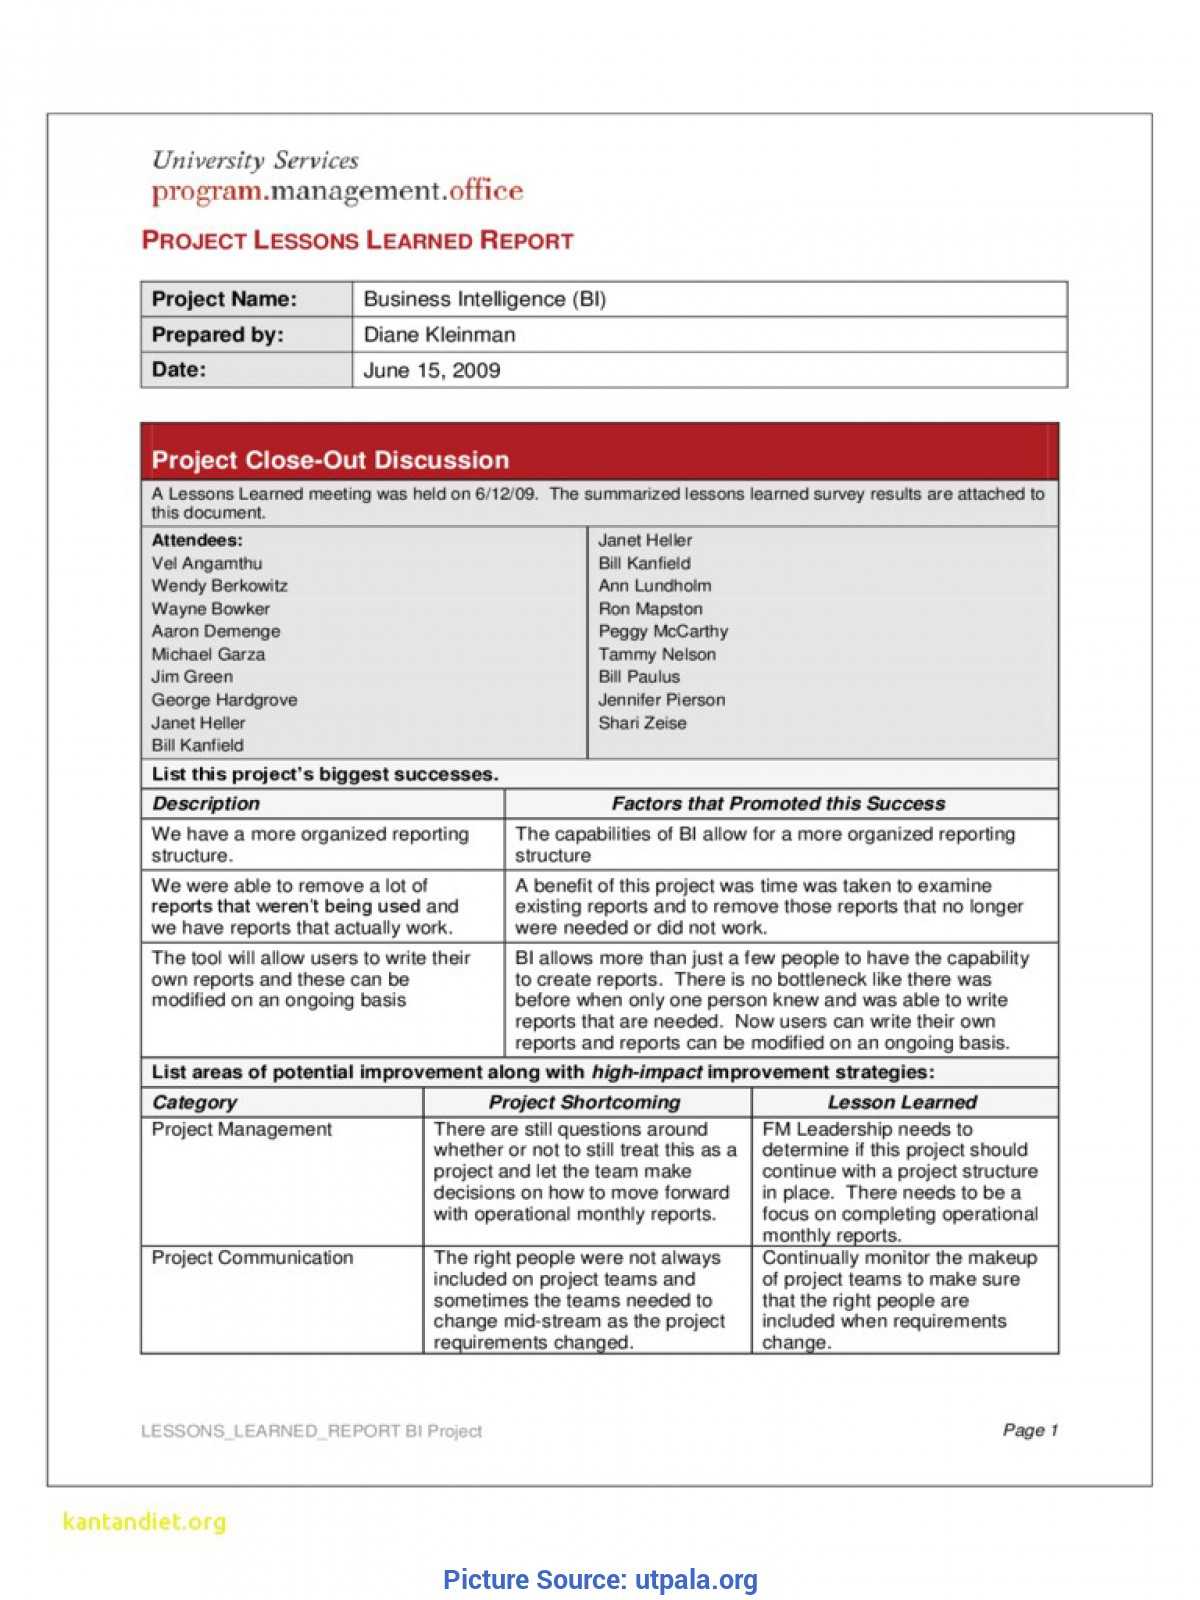 Trending Lessons Learned Document Management Lovely Lessons In Lessons Learnt Report Template